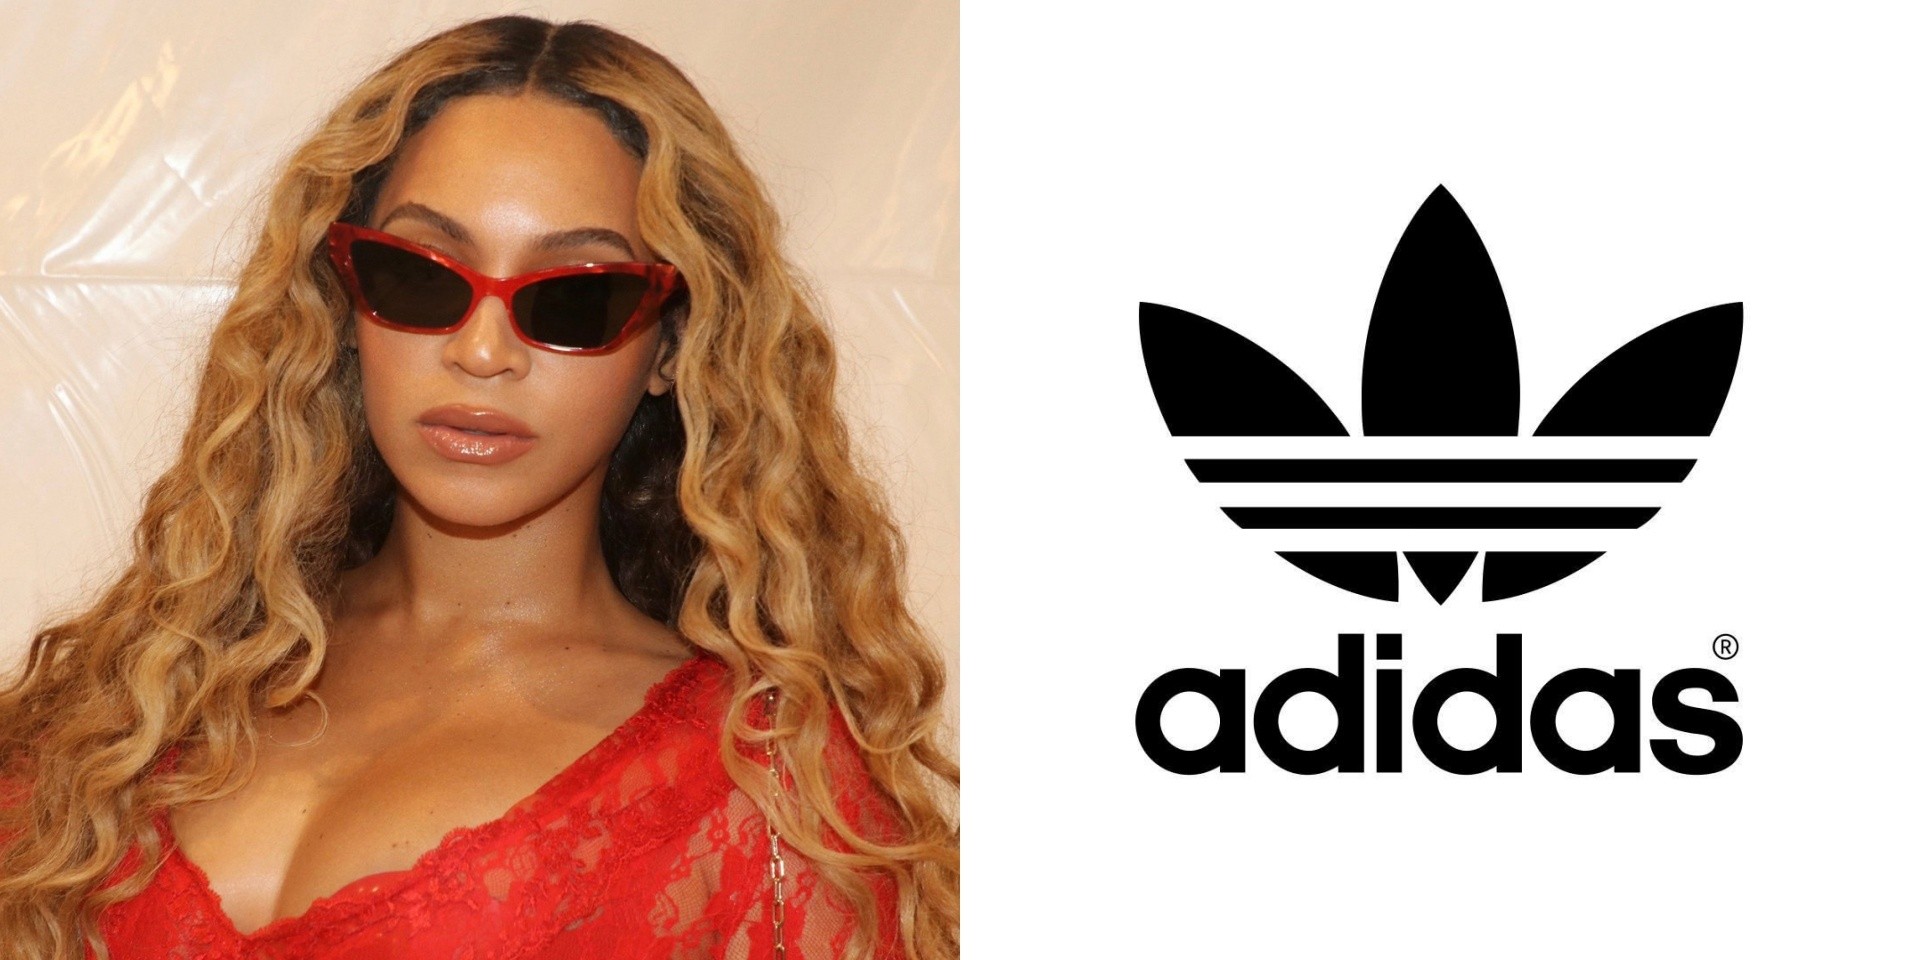 Beyoncé's new deal with adidas is a big move for both parties